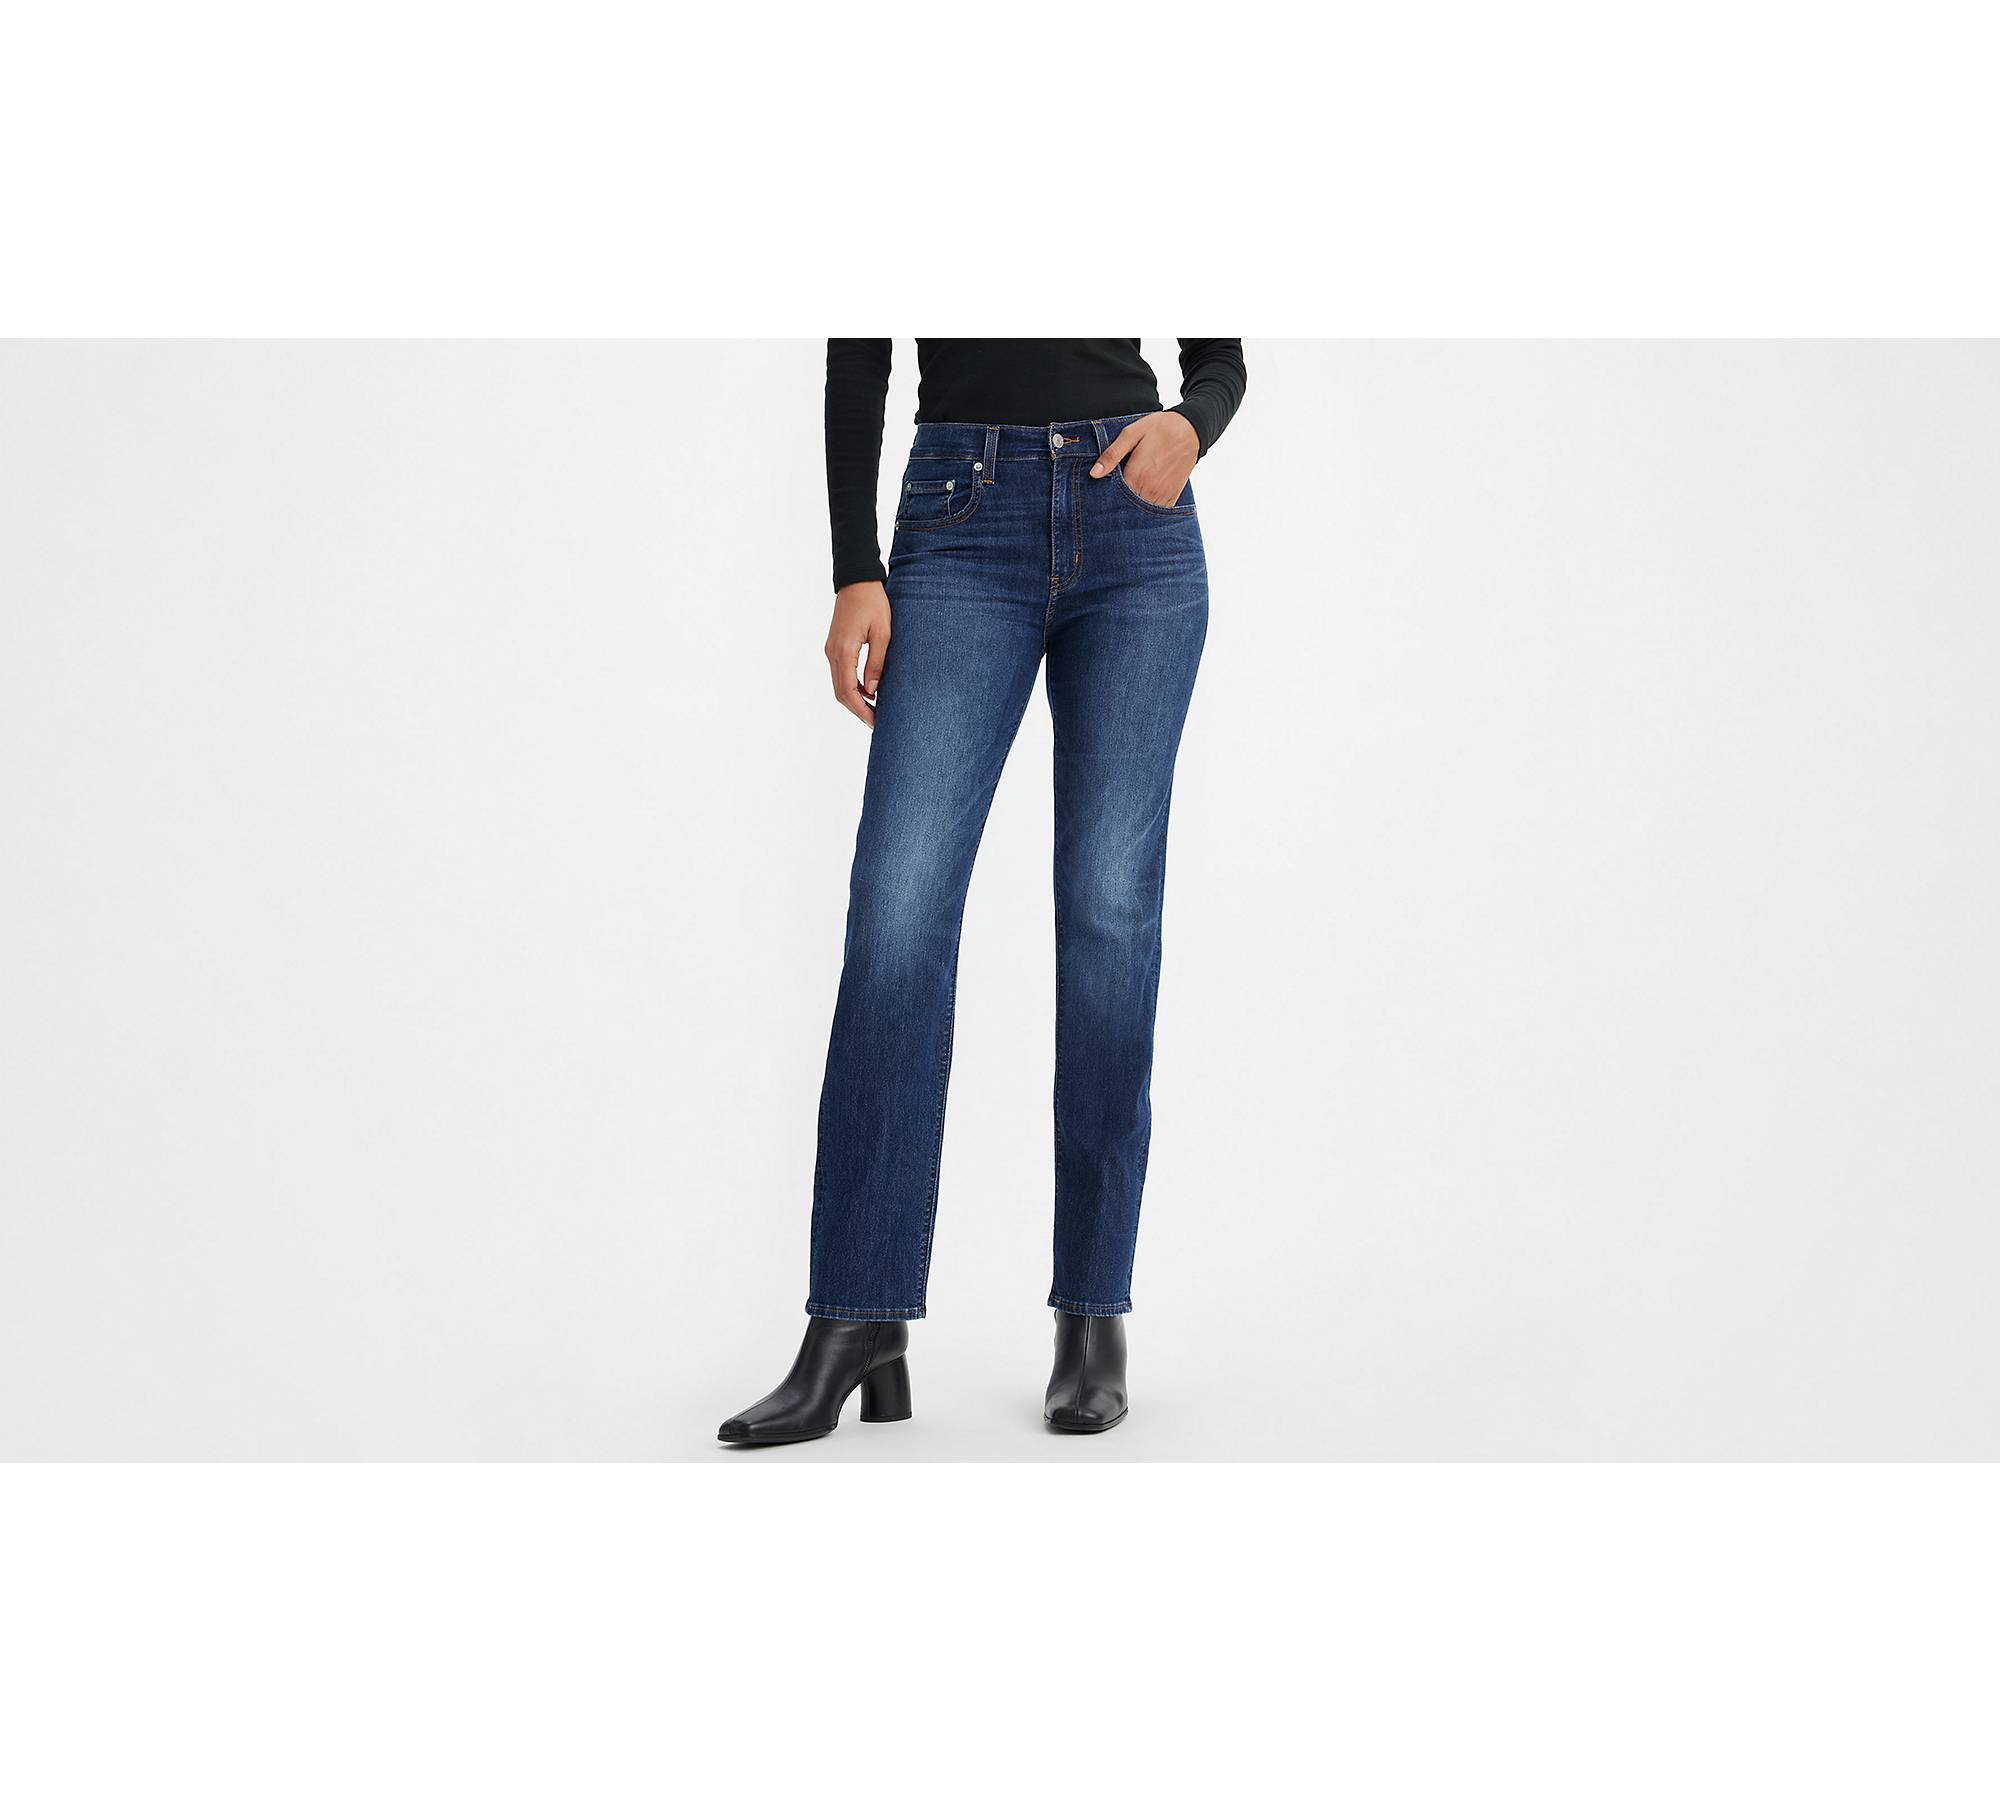 724 High Rise Straight Performance Cool Women's Jeans - Dark Wash